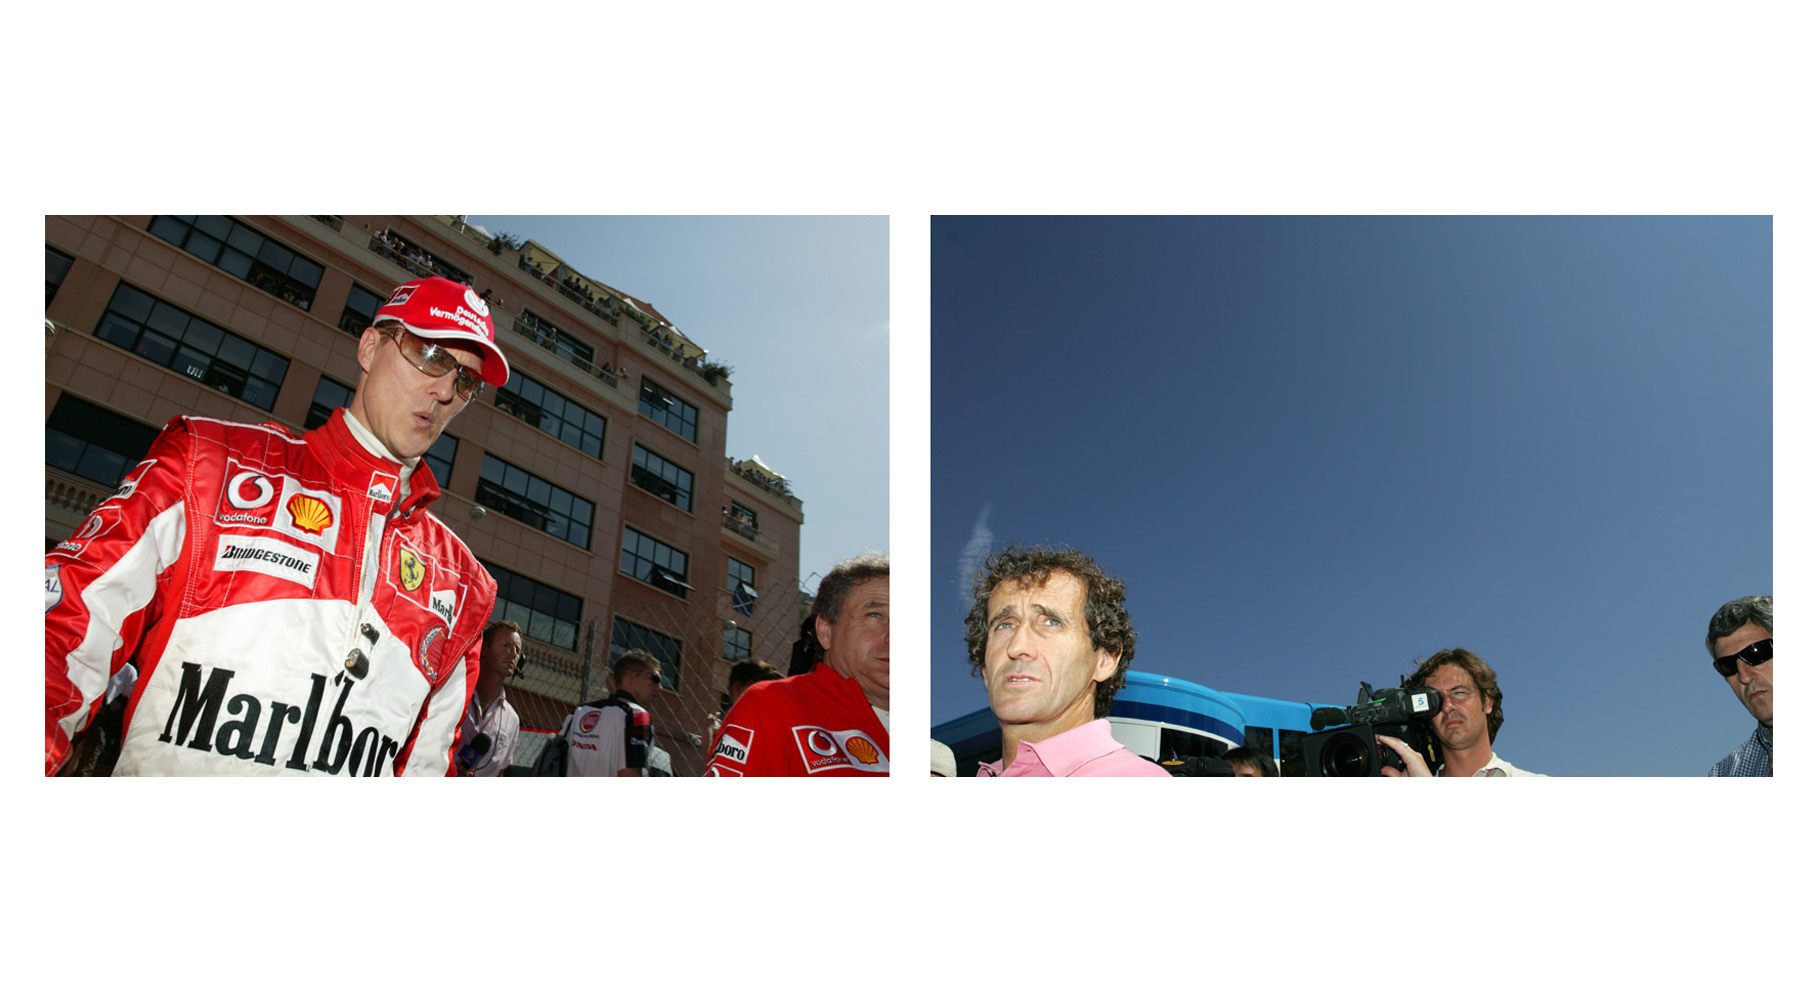 Michael Schumacher walks through the Monaco paddock and on the right Alain Prost